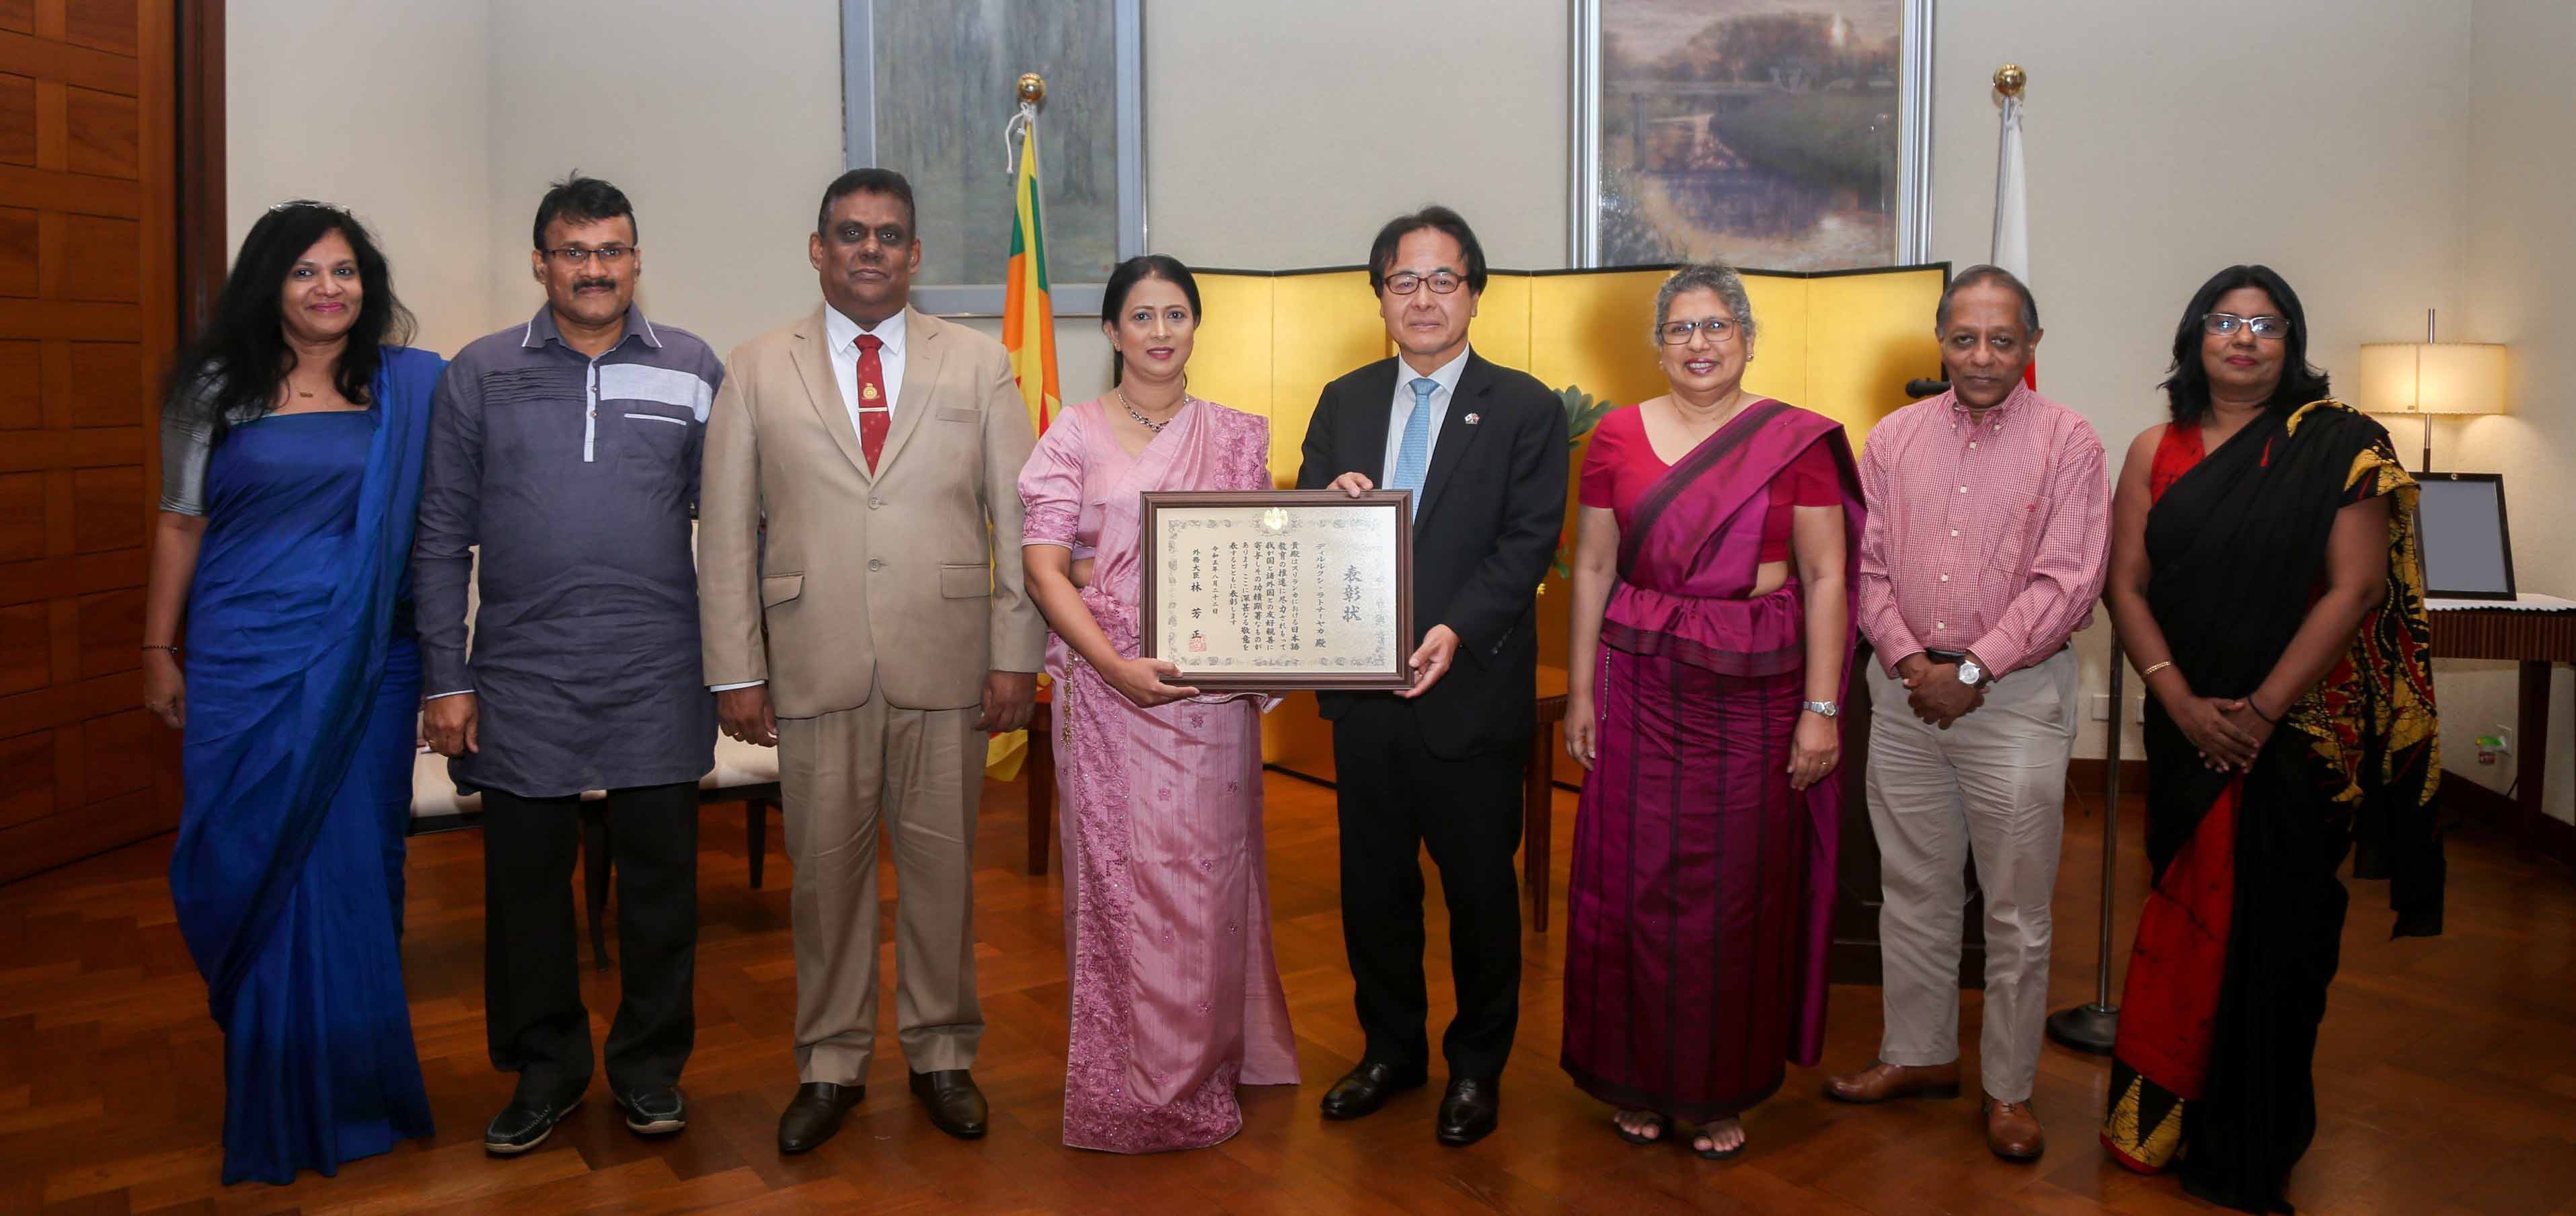 The Foreign Minister’s Commendation was awarded to Professor Dilrukshi Ratnayake